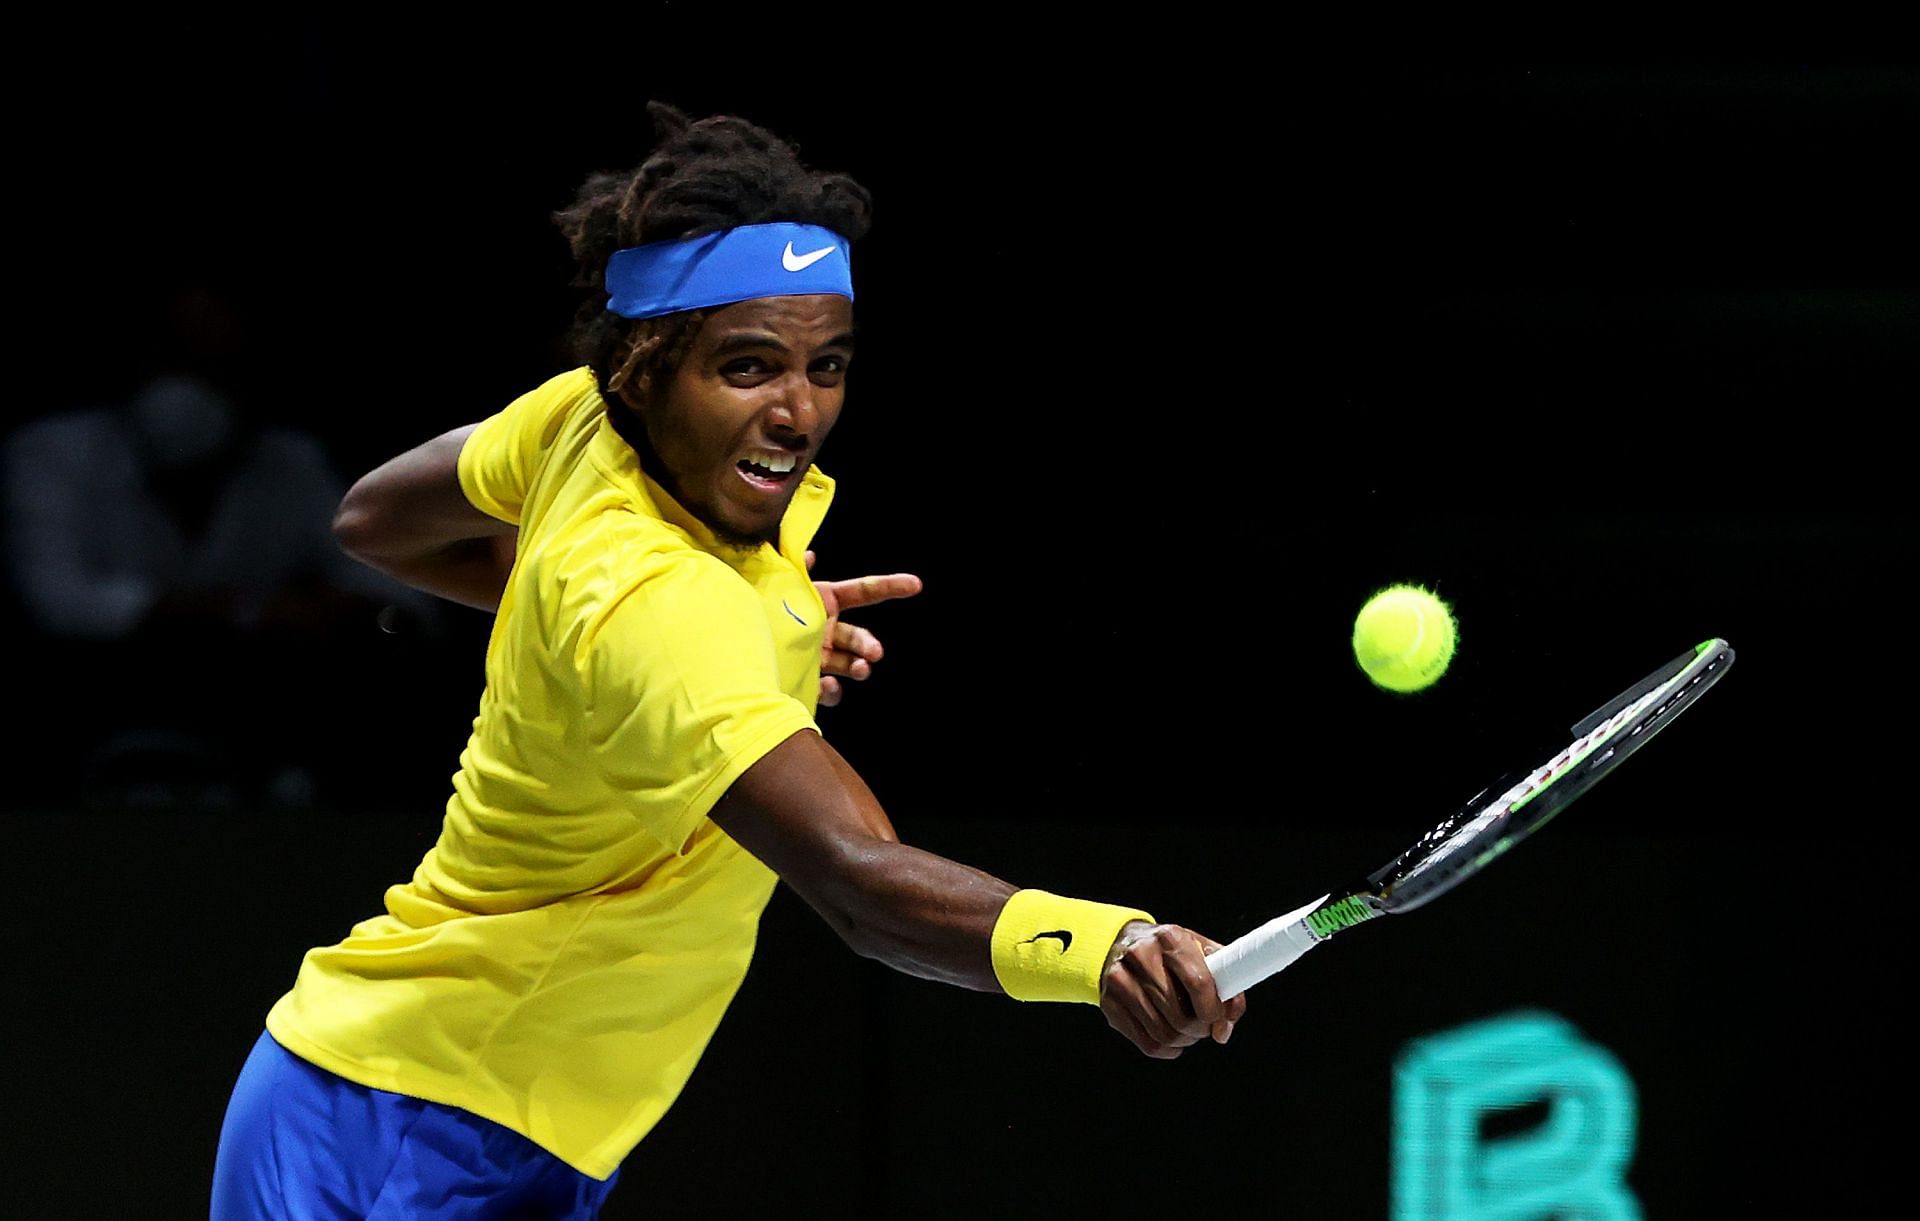 Ymer in action at Davis Cup Finals 2021